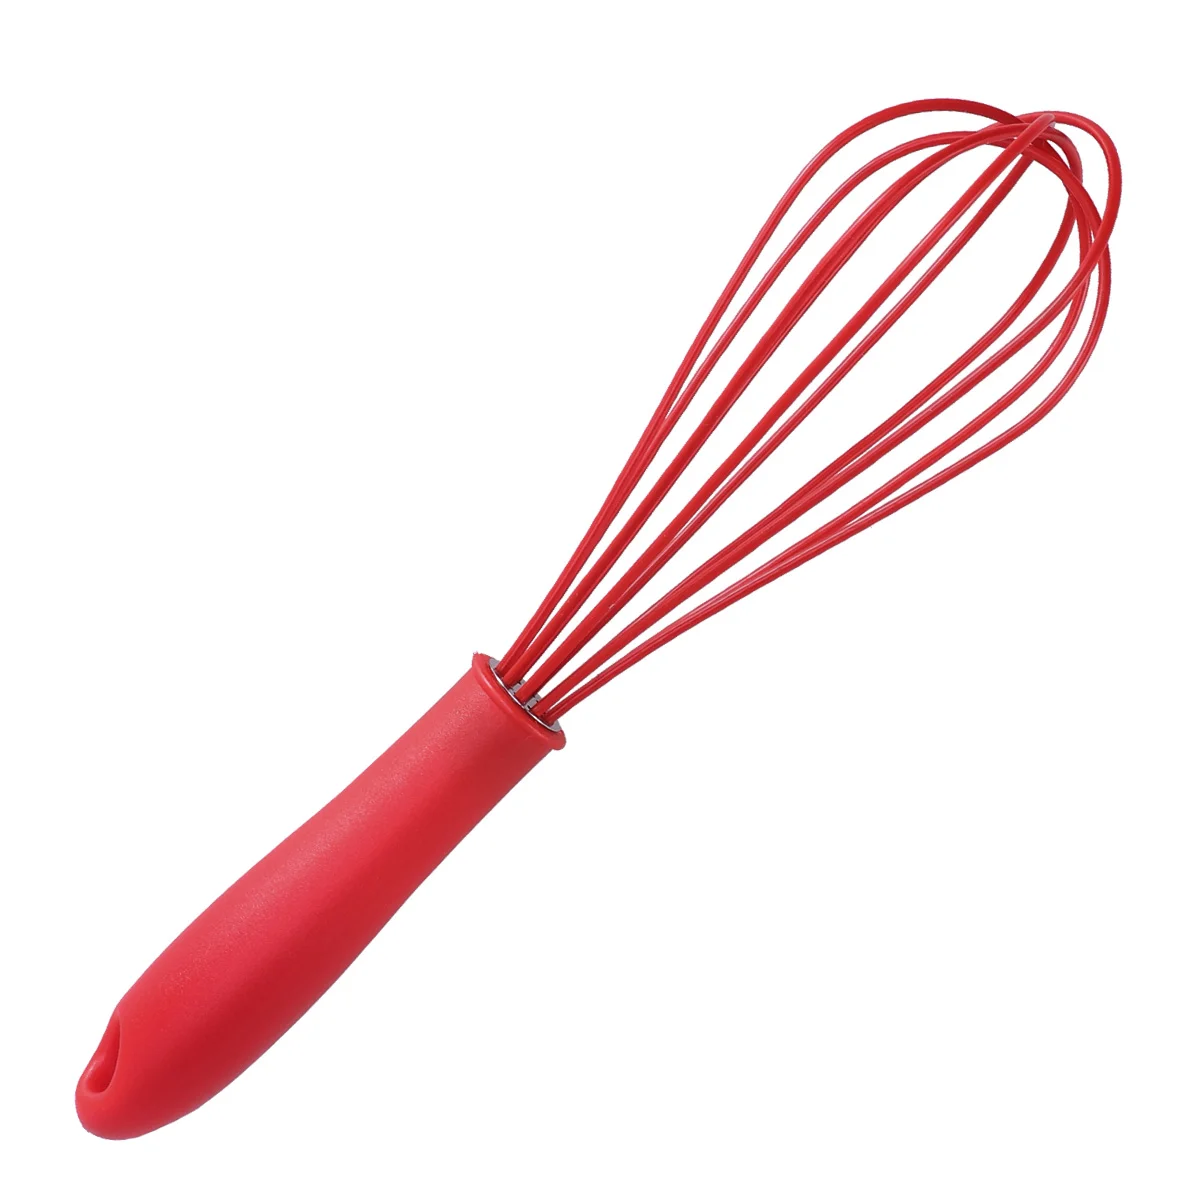 

Whisk Egg Mixer Hand Beater Manual Silicone Wire Whisks Blender Stainless Cooking Steel Stirrer Tool Wisking Dough Push Kitchen